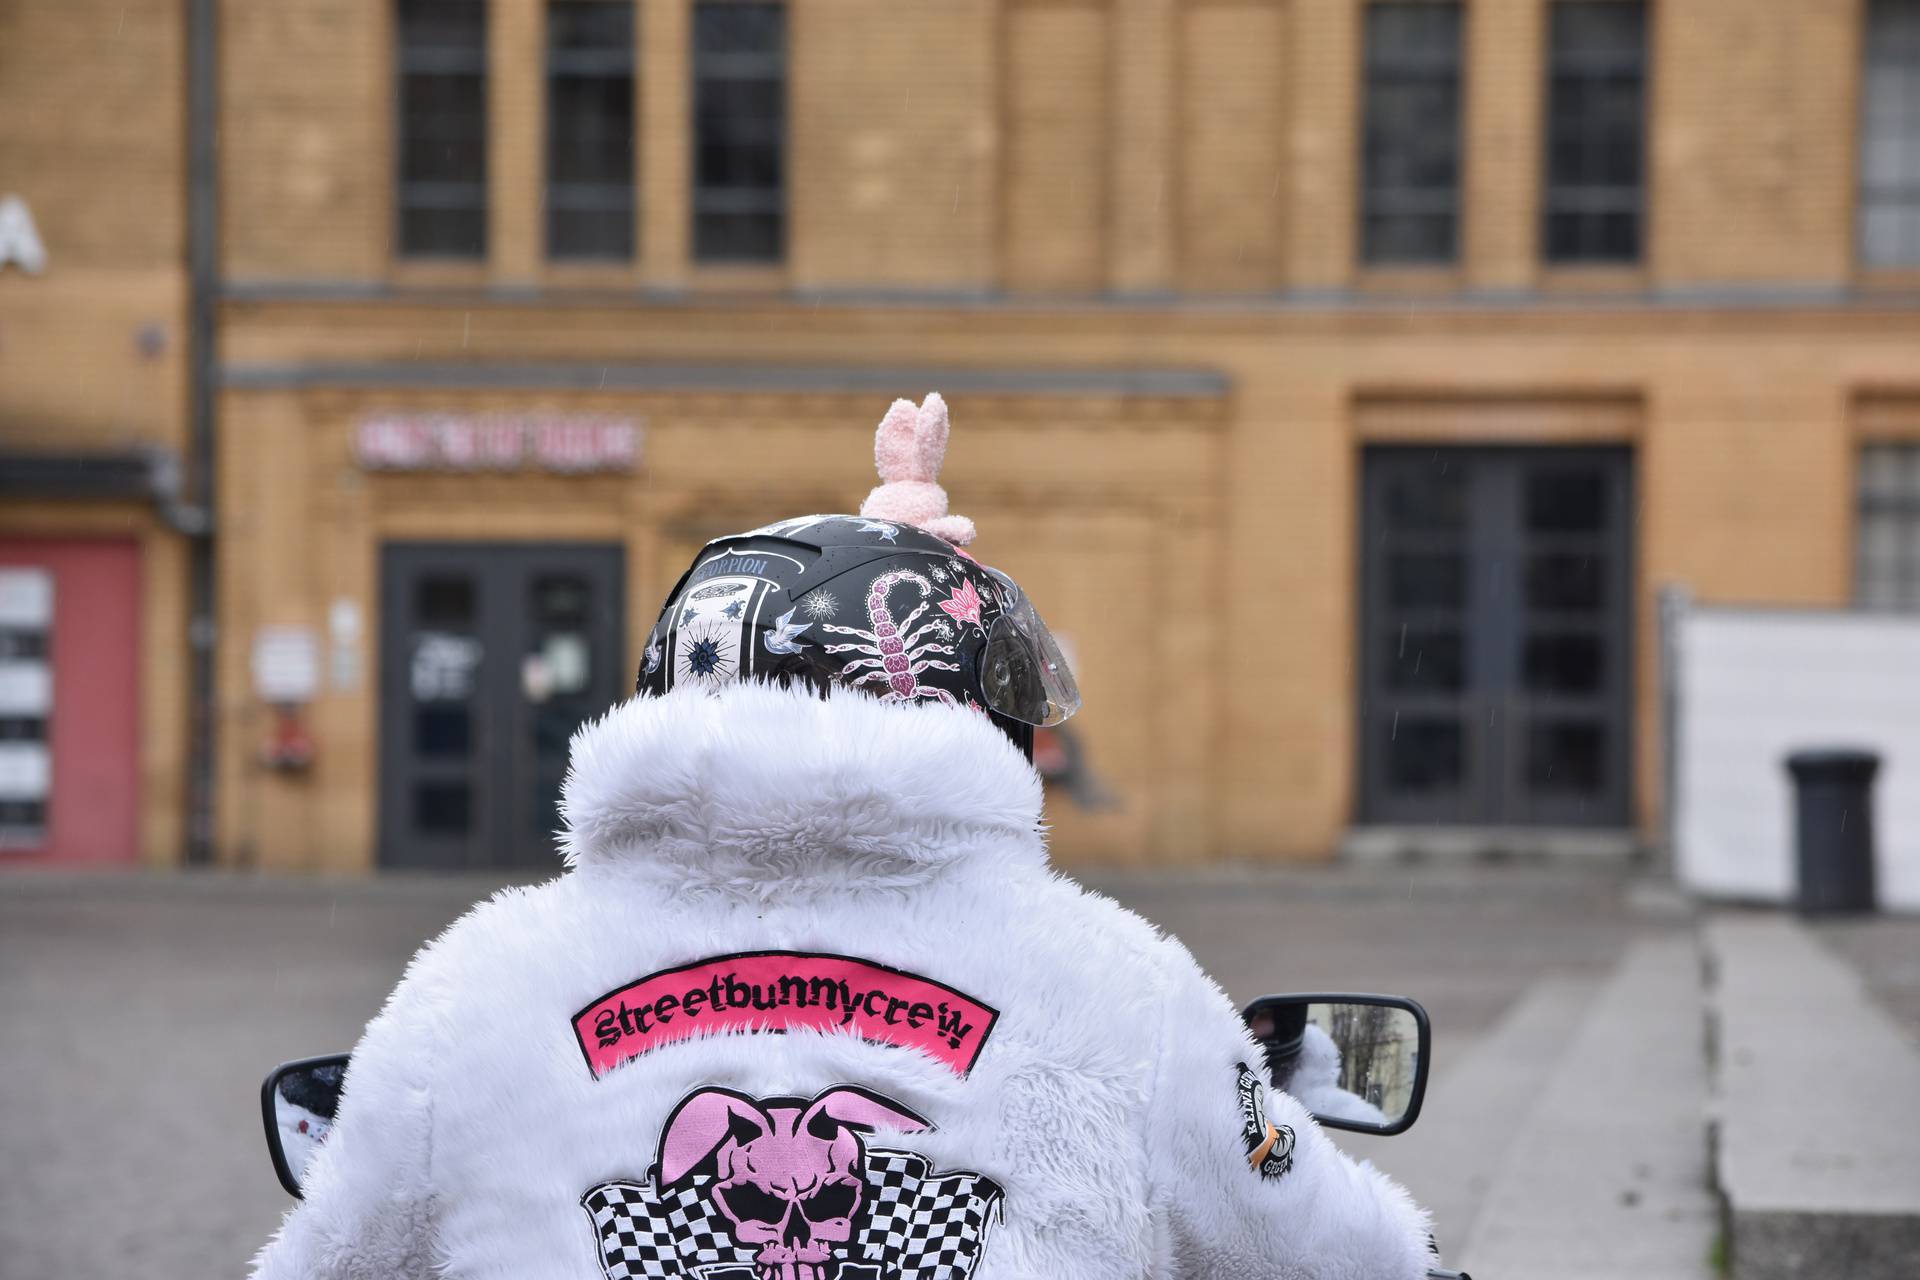 Donaldists, bikers as rabbits and other curious associations